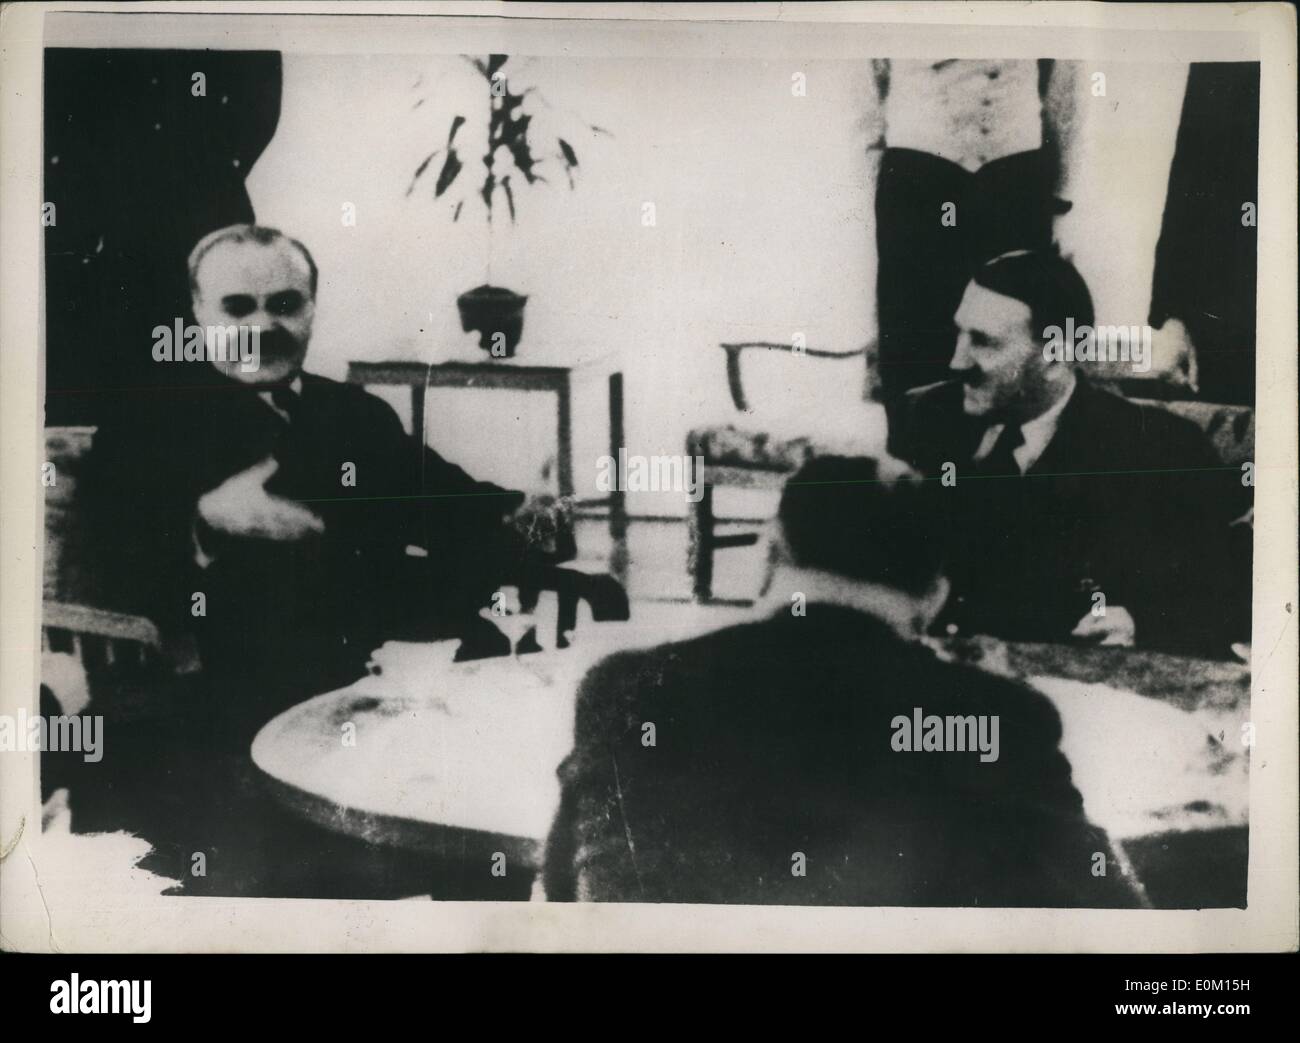 Mar. 03, 1953 - Stalin Still Gravely Ill: The conditions of Marshal Stalin still remains grave, and doctors are using leeches, oxygen and drugs in the fight to save his life. Photo shows M. Molotov (left), who might be named as successor to Stalin, seen in this picture with Hitler. Stock Photo